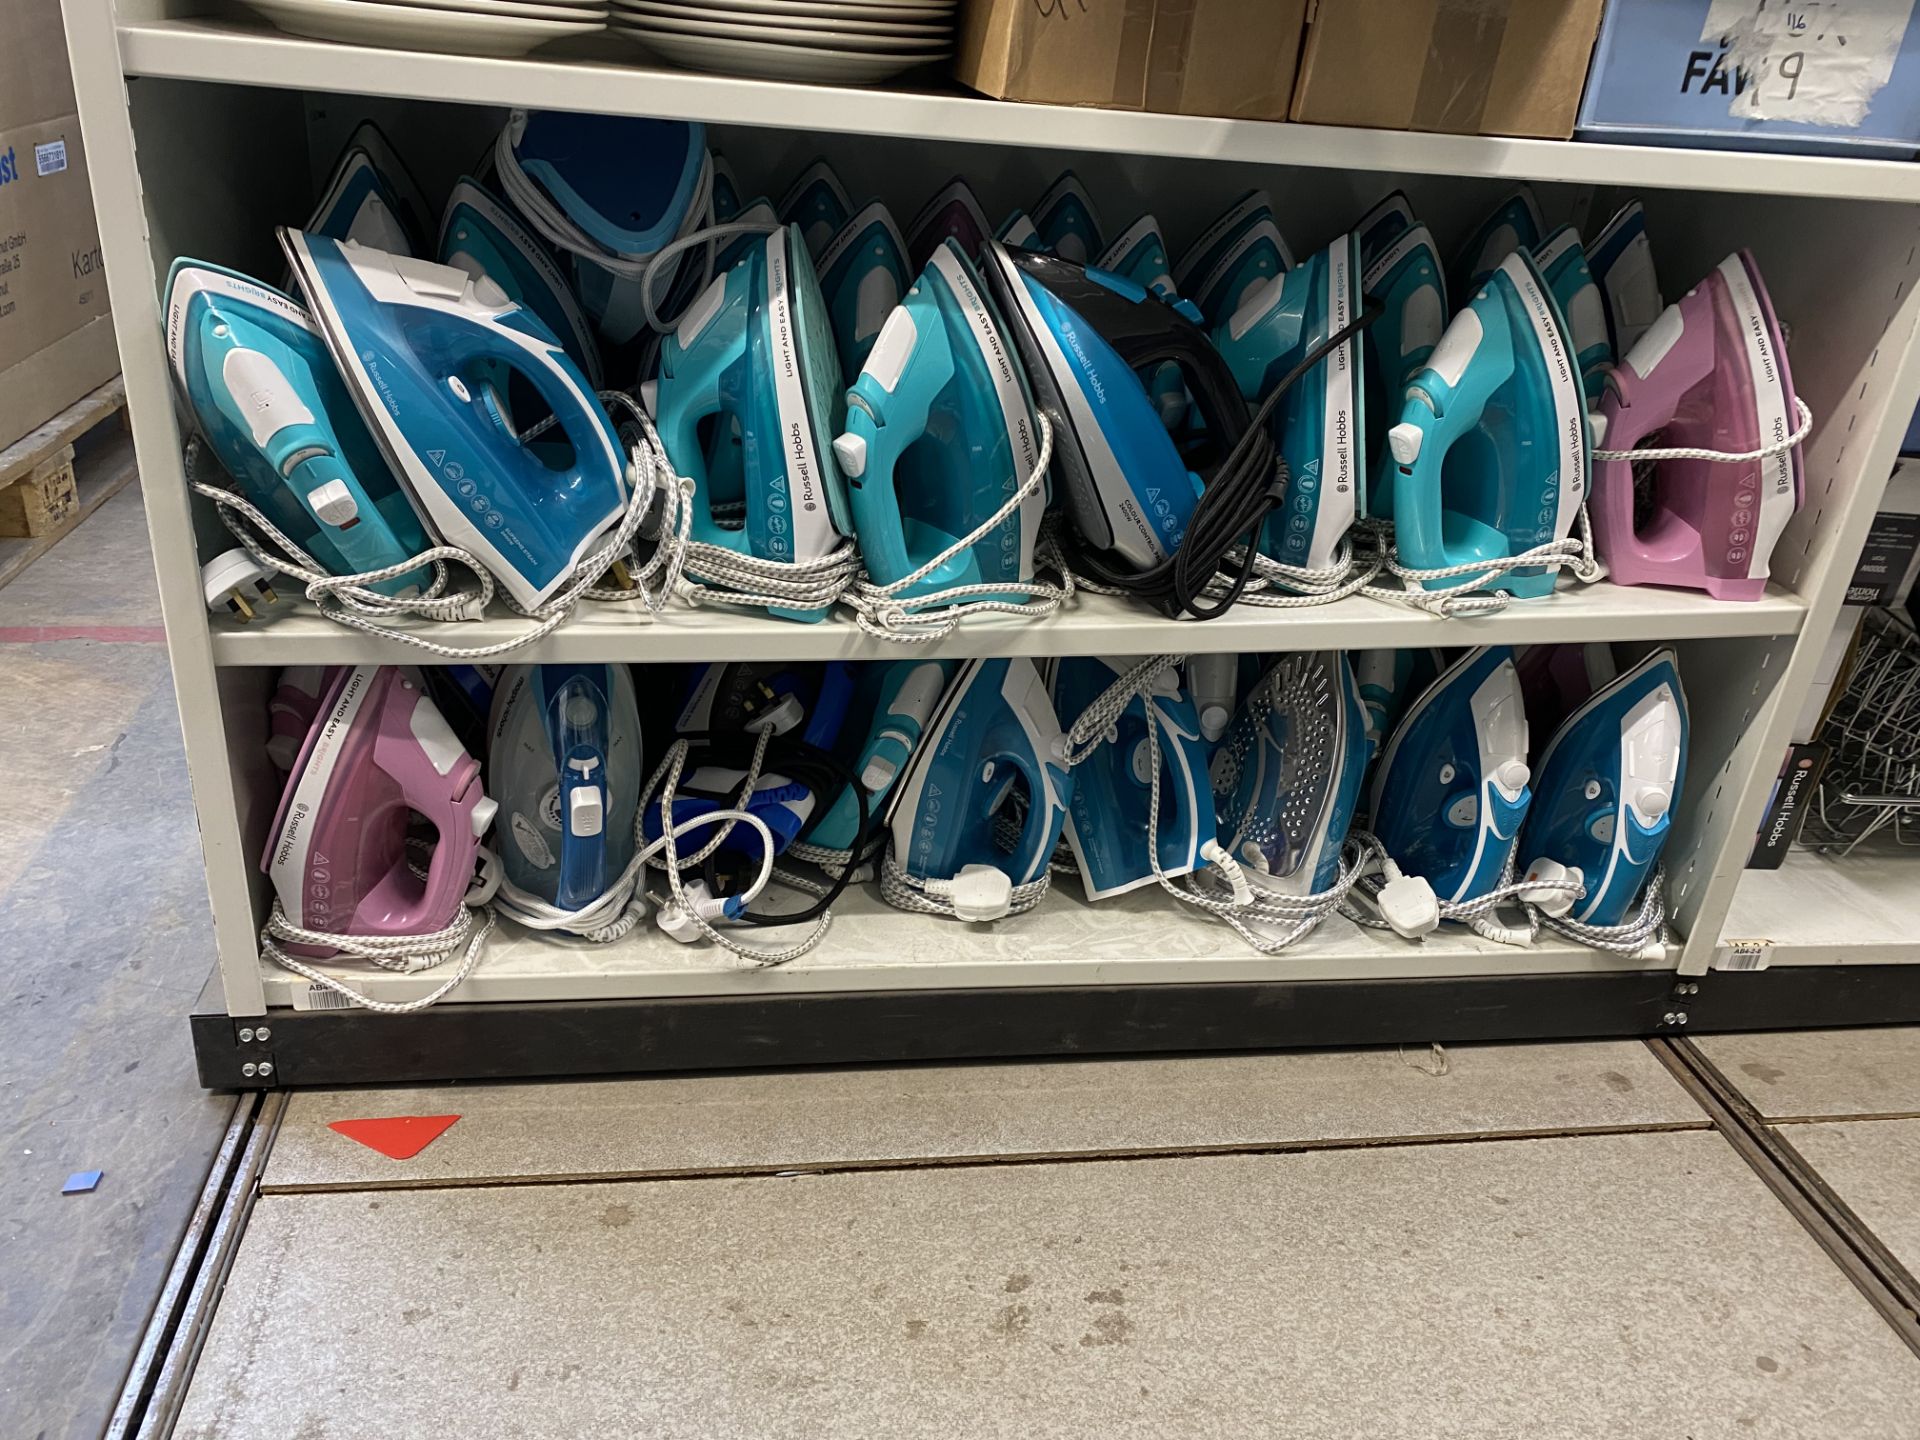 approximately 40 x Various Hand Held Irons